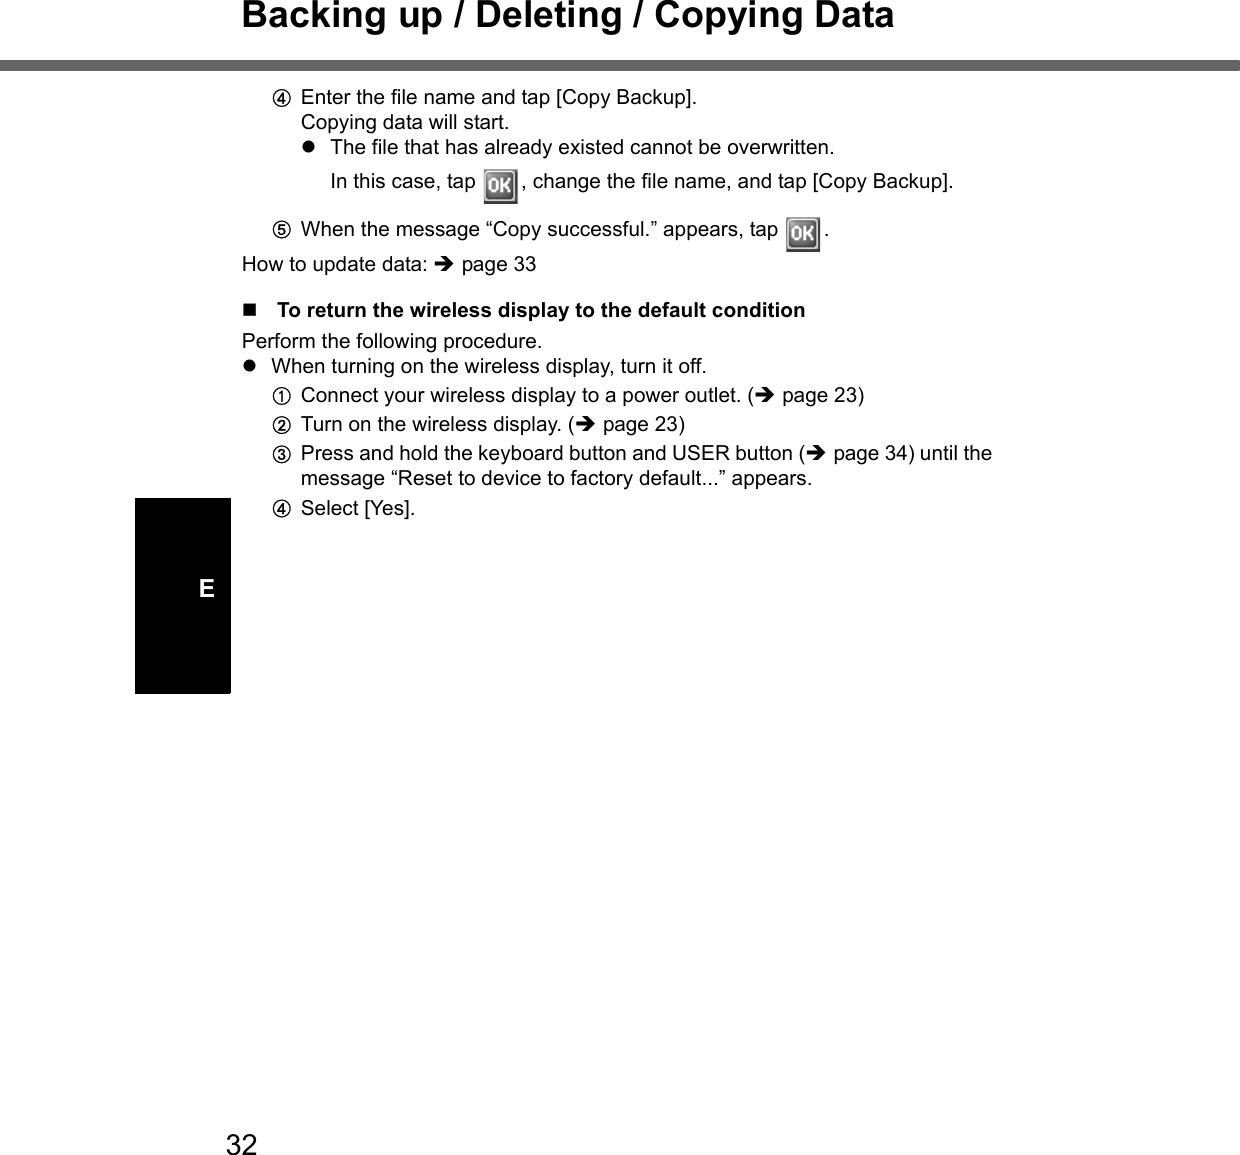 32Backing up / Deleting / Copying DataEDEnter the file name and tap [Copy Backup].Copying data will start.zThe file that has already existed cannot be overwritten. In this case, tap  , change the file name, and tap [Copy Backup]. EWhen the message “Copy successful.” appears, tap  .How to update data: Îpage 33To return the wireless display to the default conditionPerform the following procedure.zWhen turning on the wireless display, turn it off.AConnect your wireless display to a power outlet. (Îpage 23)BTurn on the wireless display. (Îpage 23)CPress and hold the keyboard button and USER button (Îpage 34) until the message “Reset to device to factory default...” appears.DSelect [Yes].